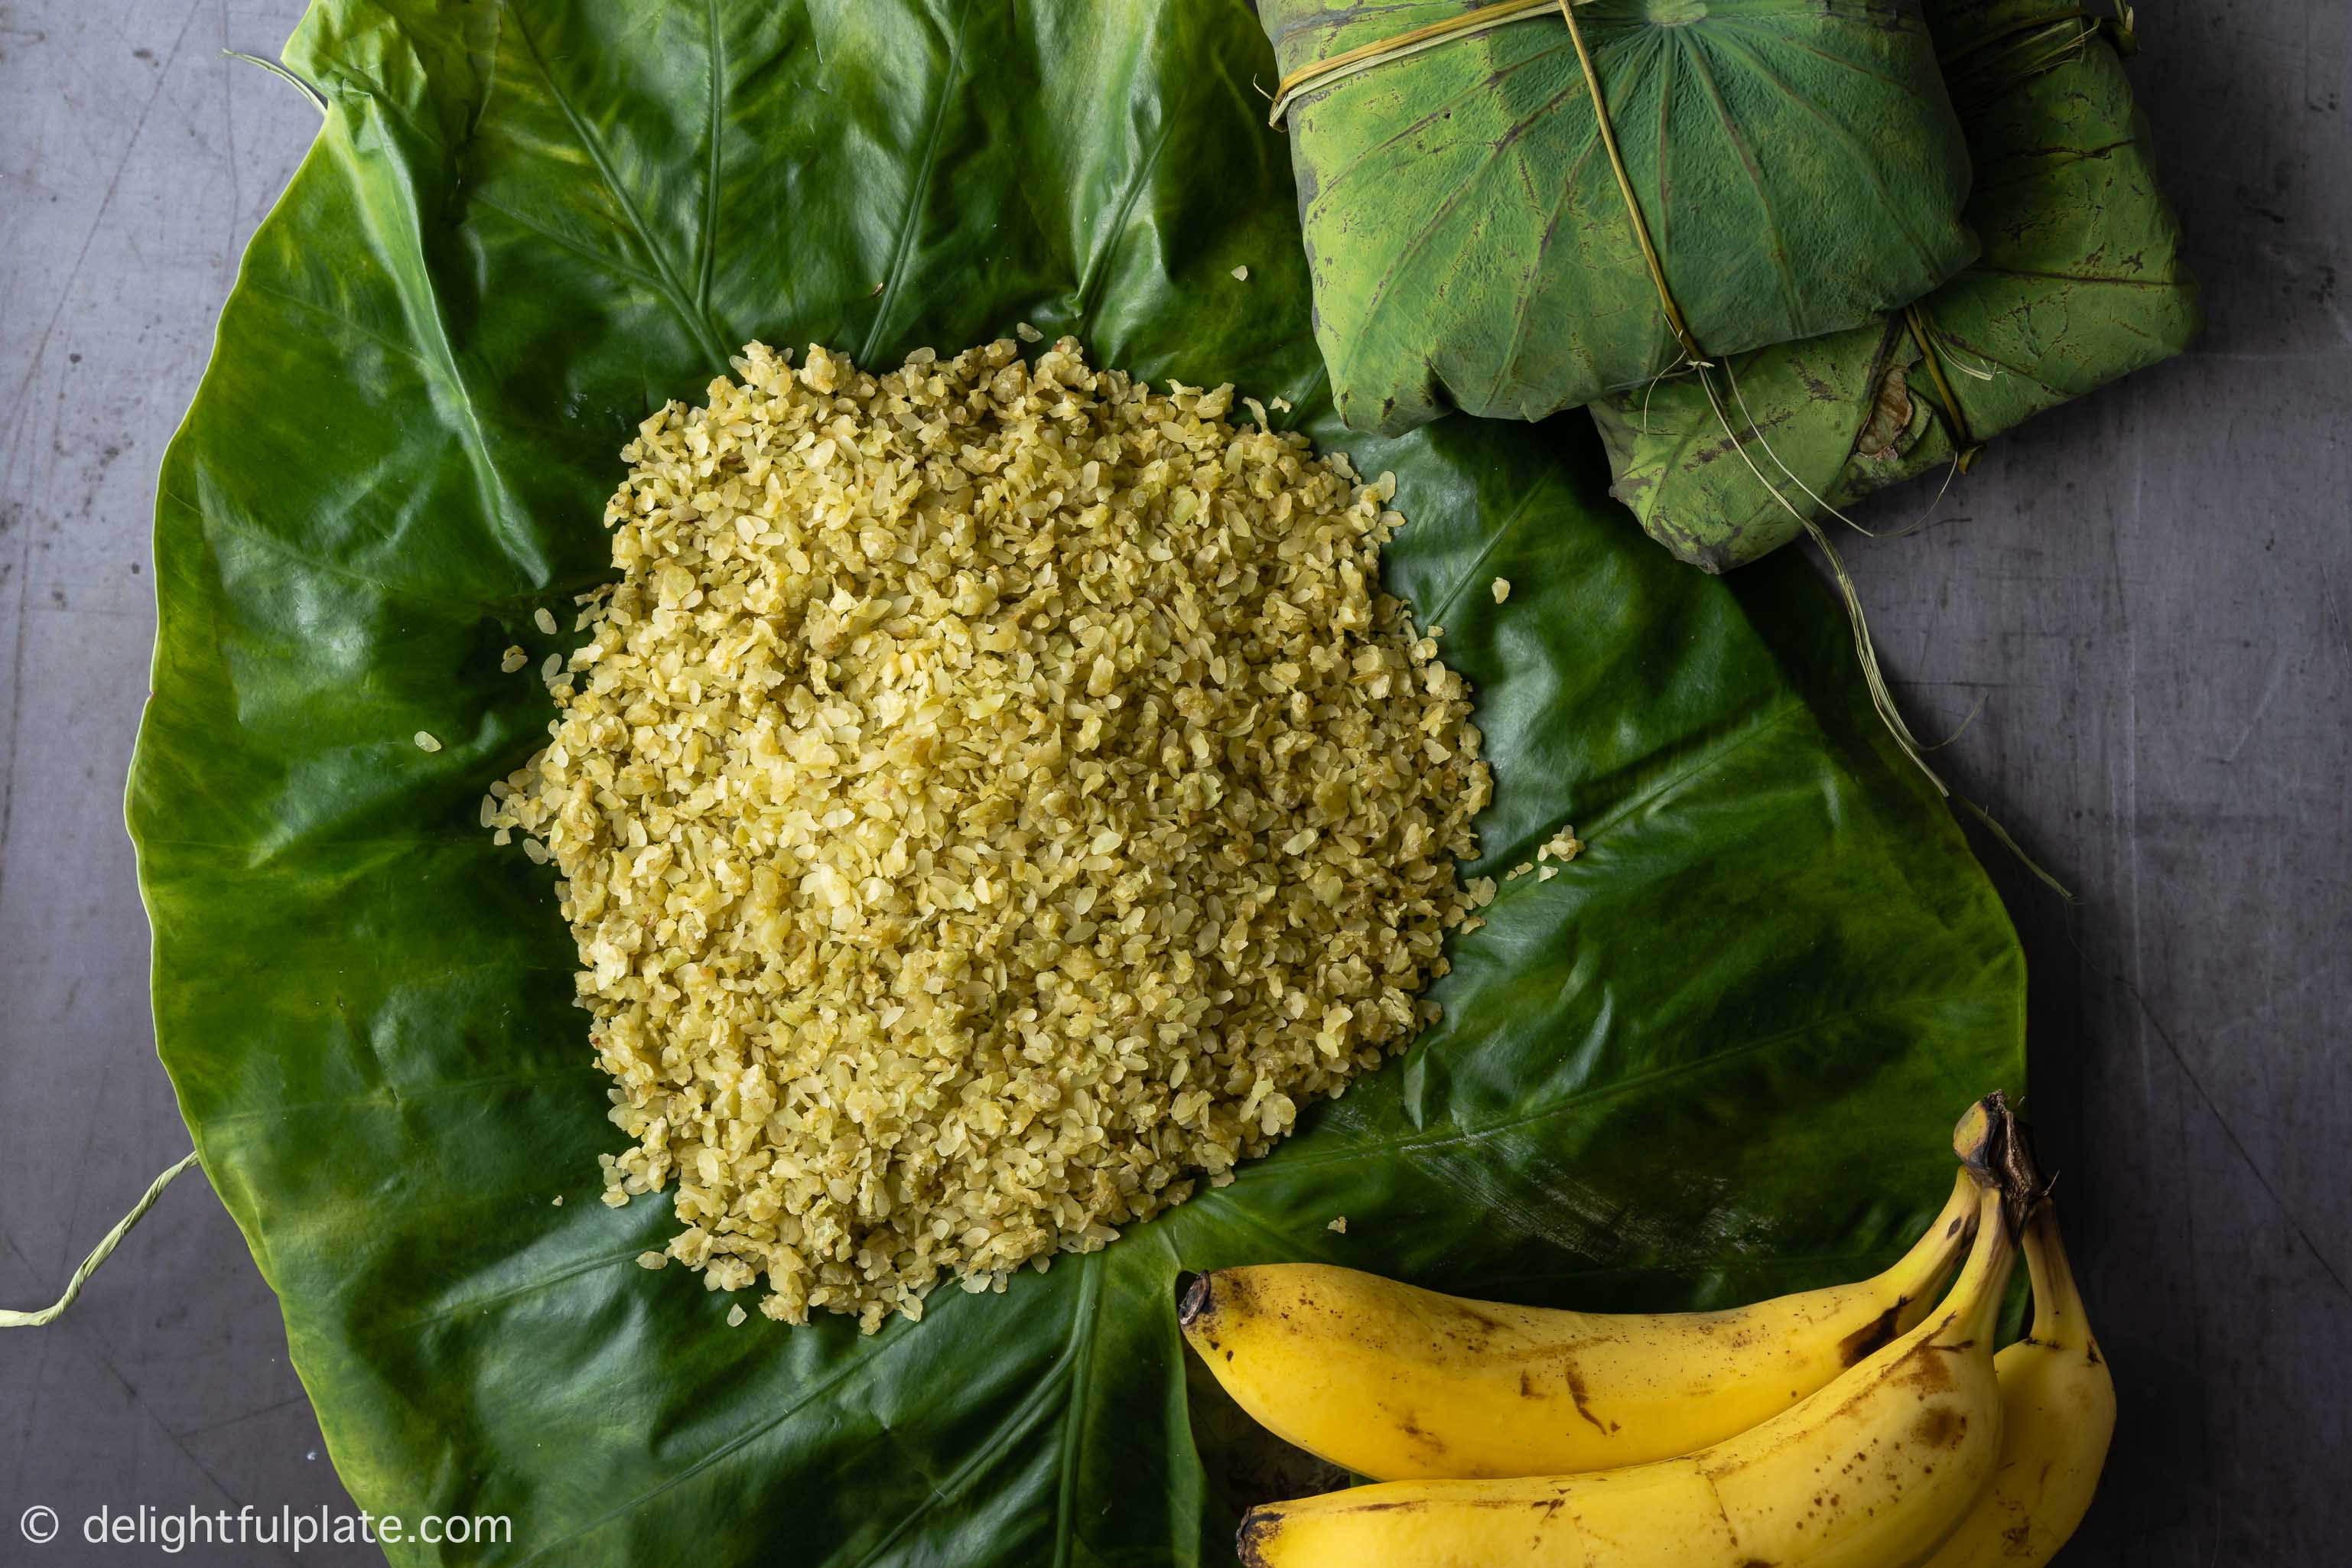 a small pile of Vietnamese green young rice, served with ripe bananas